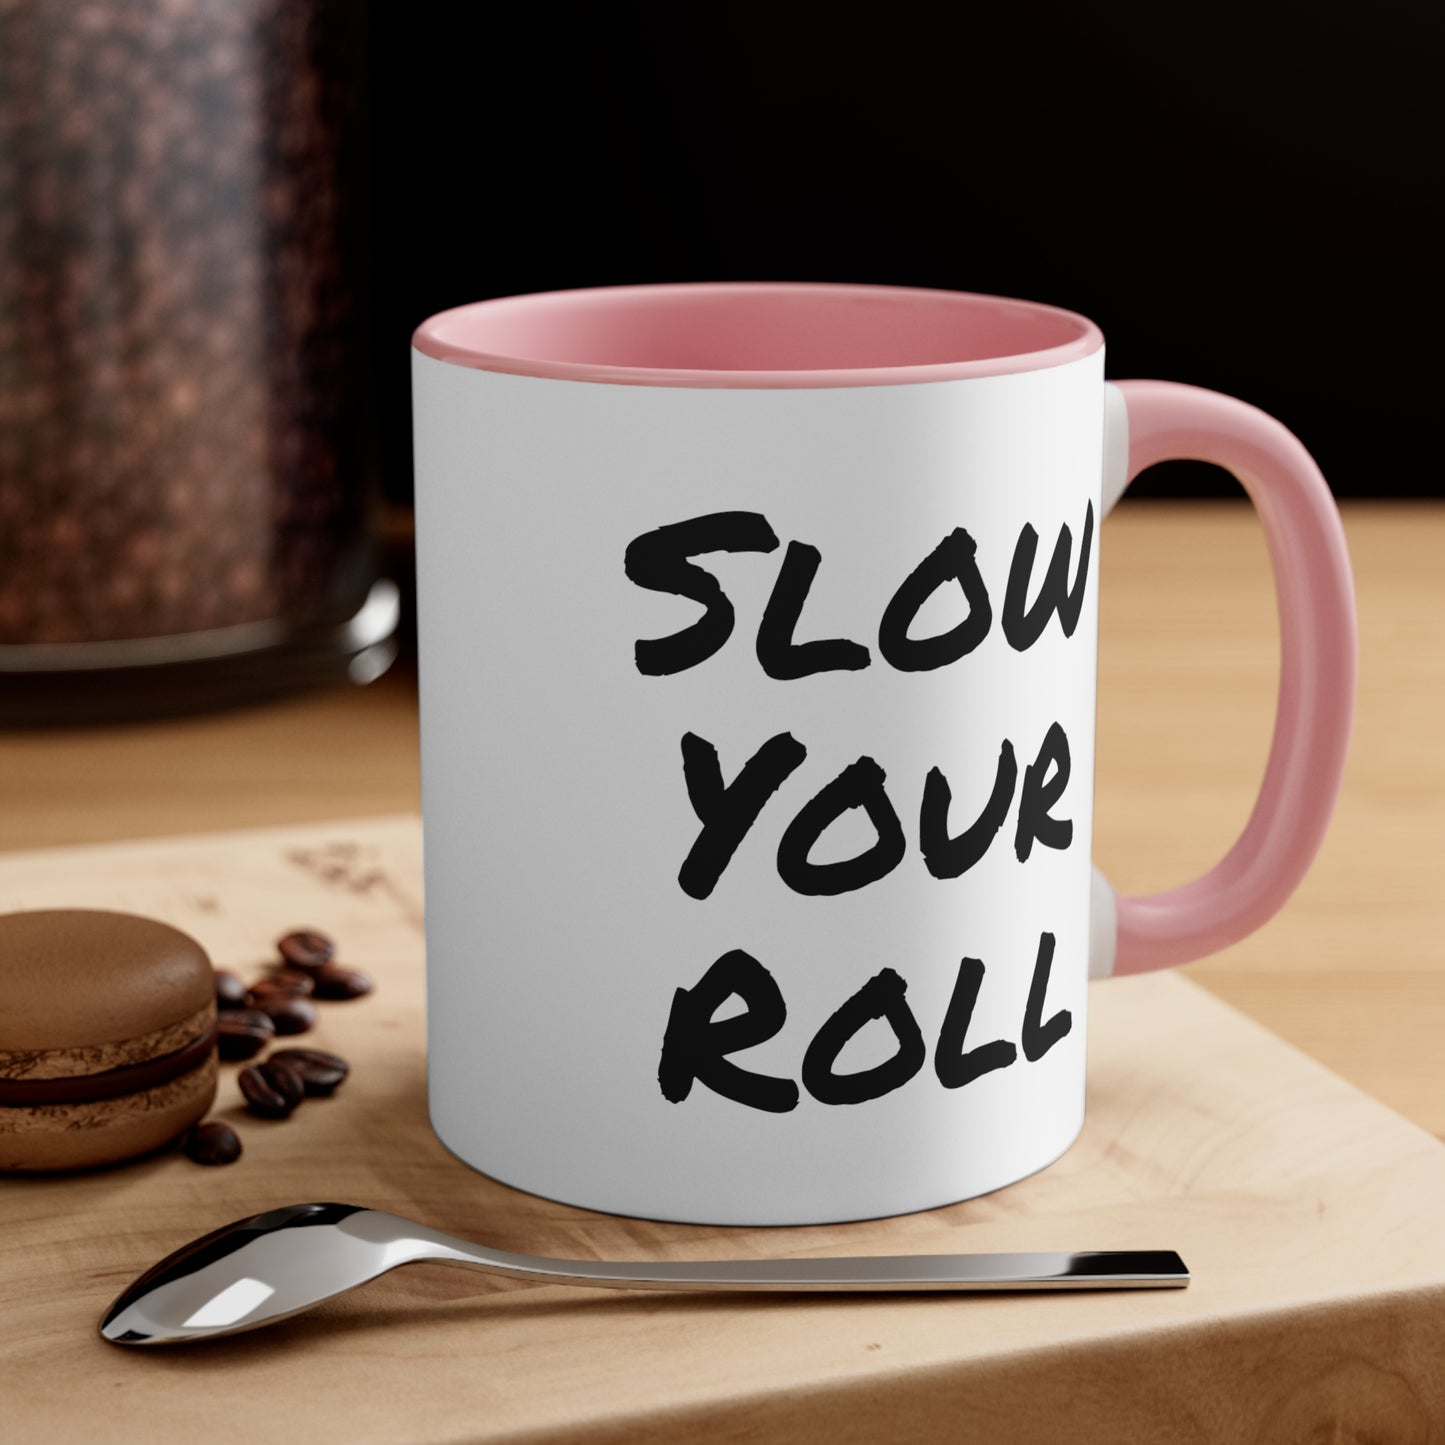 Slow Your Roll  Accent Coffee Mug, 11oz